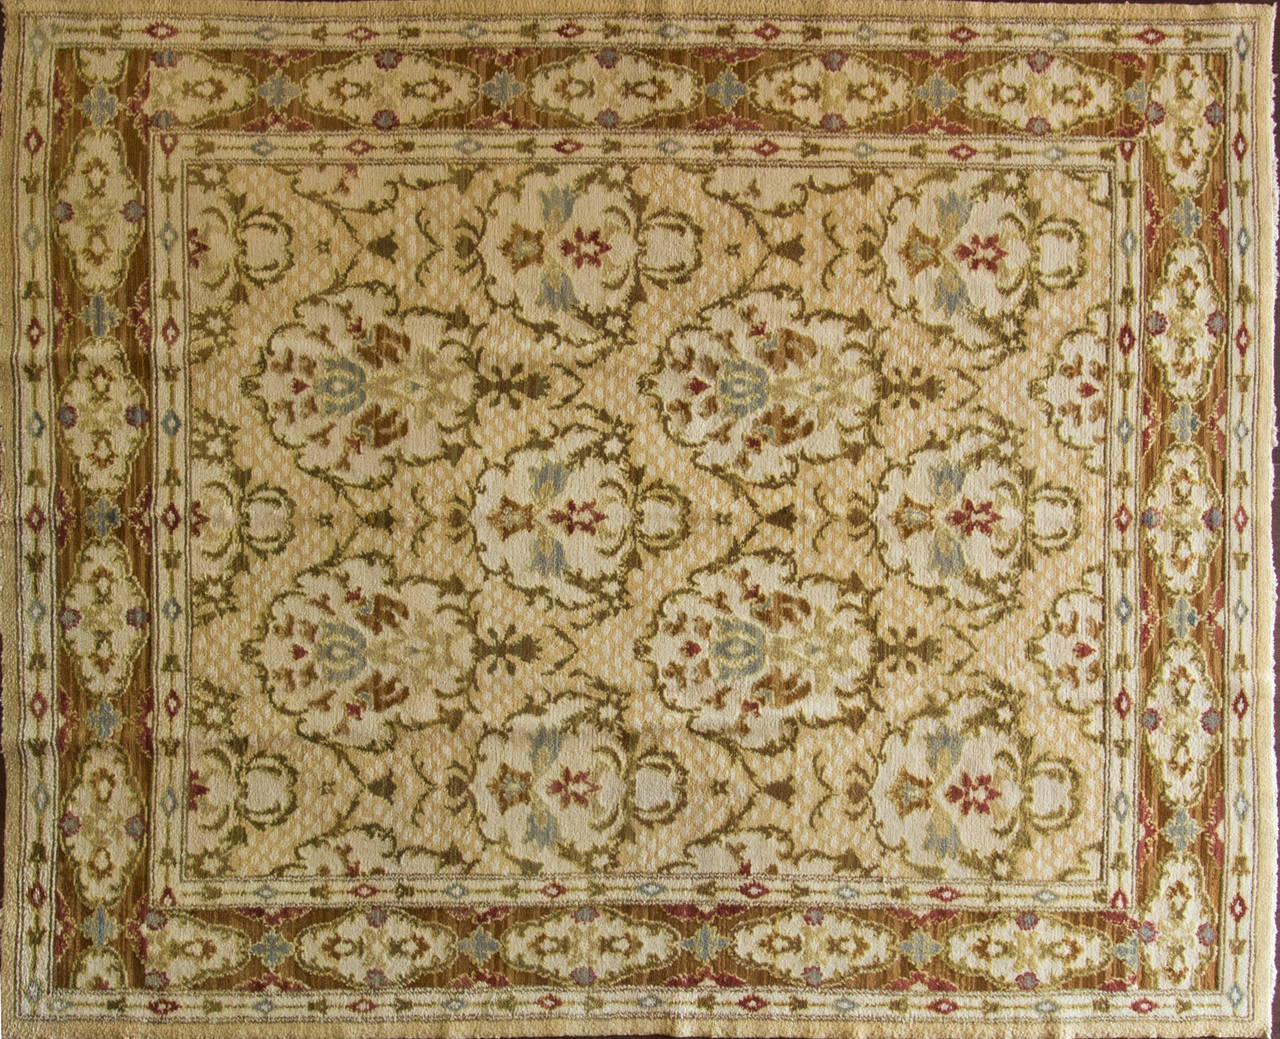 During the Islamic occupation of the 11th century, Medieval Spain was the first European country to make knotted pile rugs. The Hispano-Moresque society was a tremendously cultured civilization with diverse populations: Muslim Arab, Jewish,